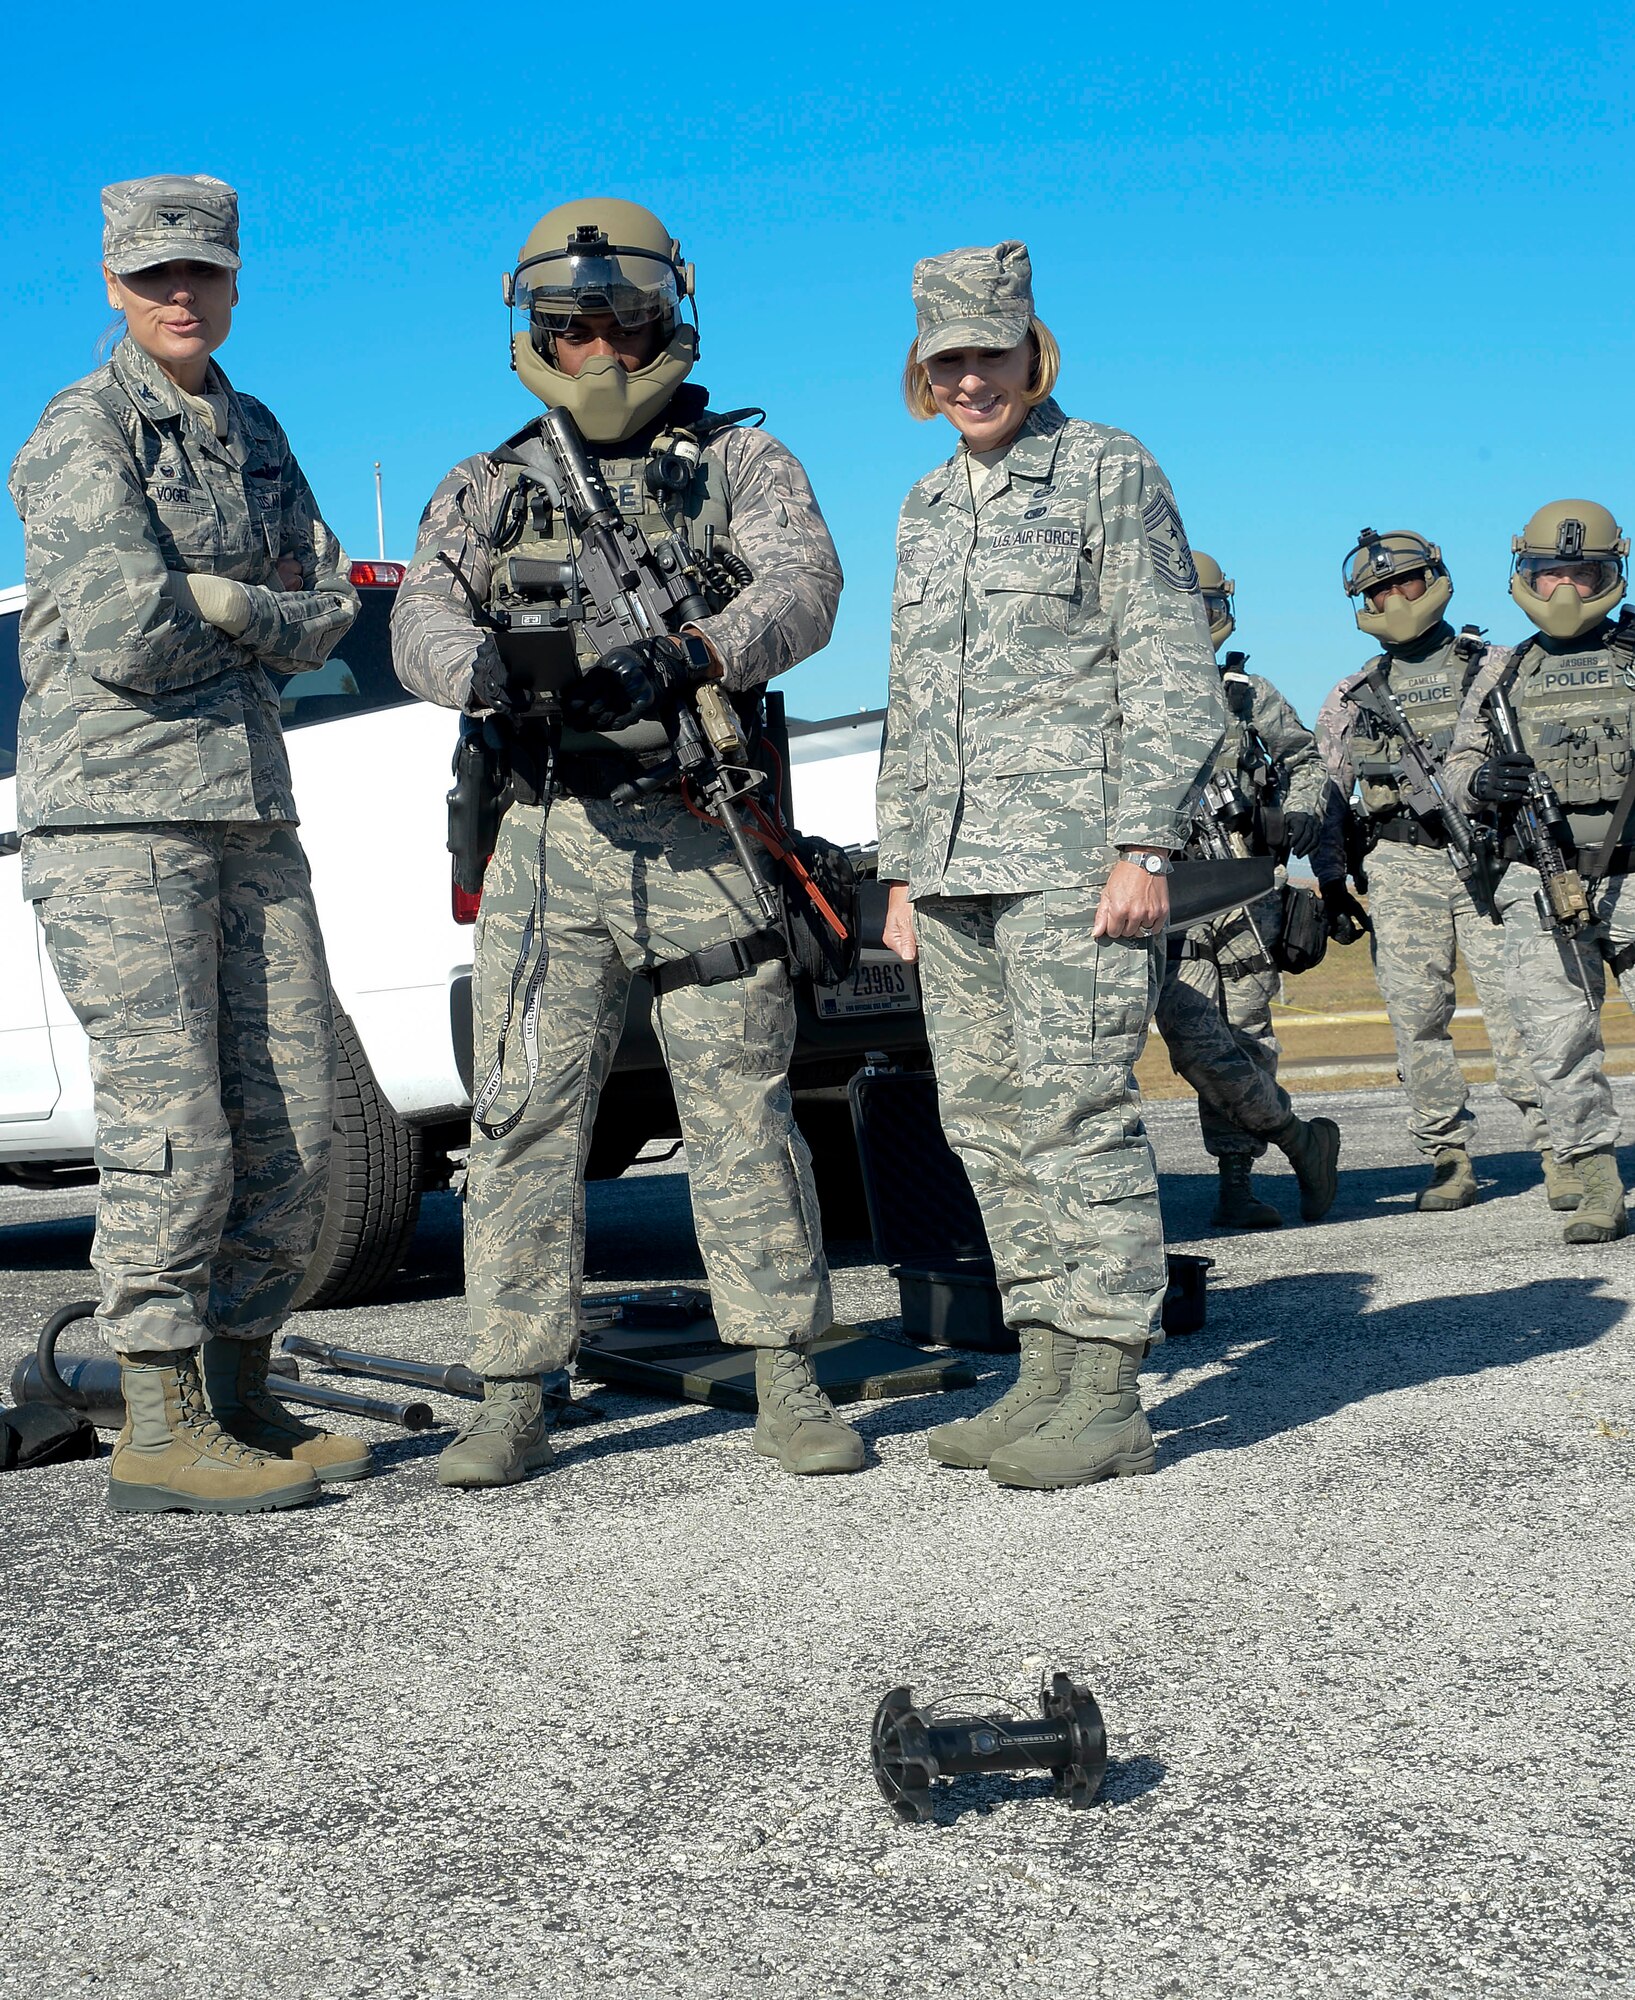 Col. April Vogel, commander of the 6th Air Mobility Wing (AMW), and Chief Master Sgt. Melanie Noel, command chief of the 6th AMW, right, watch a brief demonstration of the equipment used by the special weapons and tactical (SWAT) teams during an immersion, Nov. 21, 2016 at MacDill Air Force Base, Fla. During the visit, Vogel and Noel were briefed on the mission of the SWAT team and their daily operations. (U.S. Air Force photo by Senior Airman Jenay Randolph) 